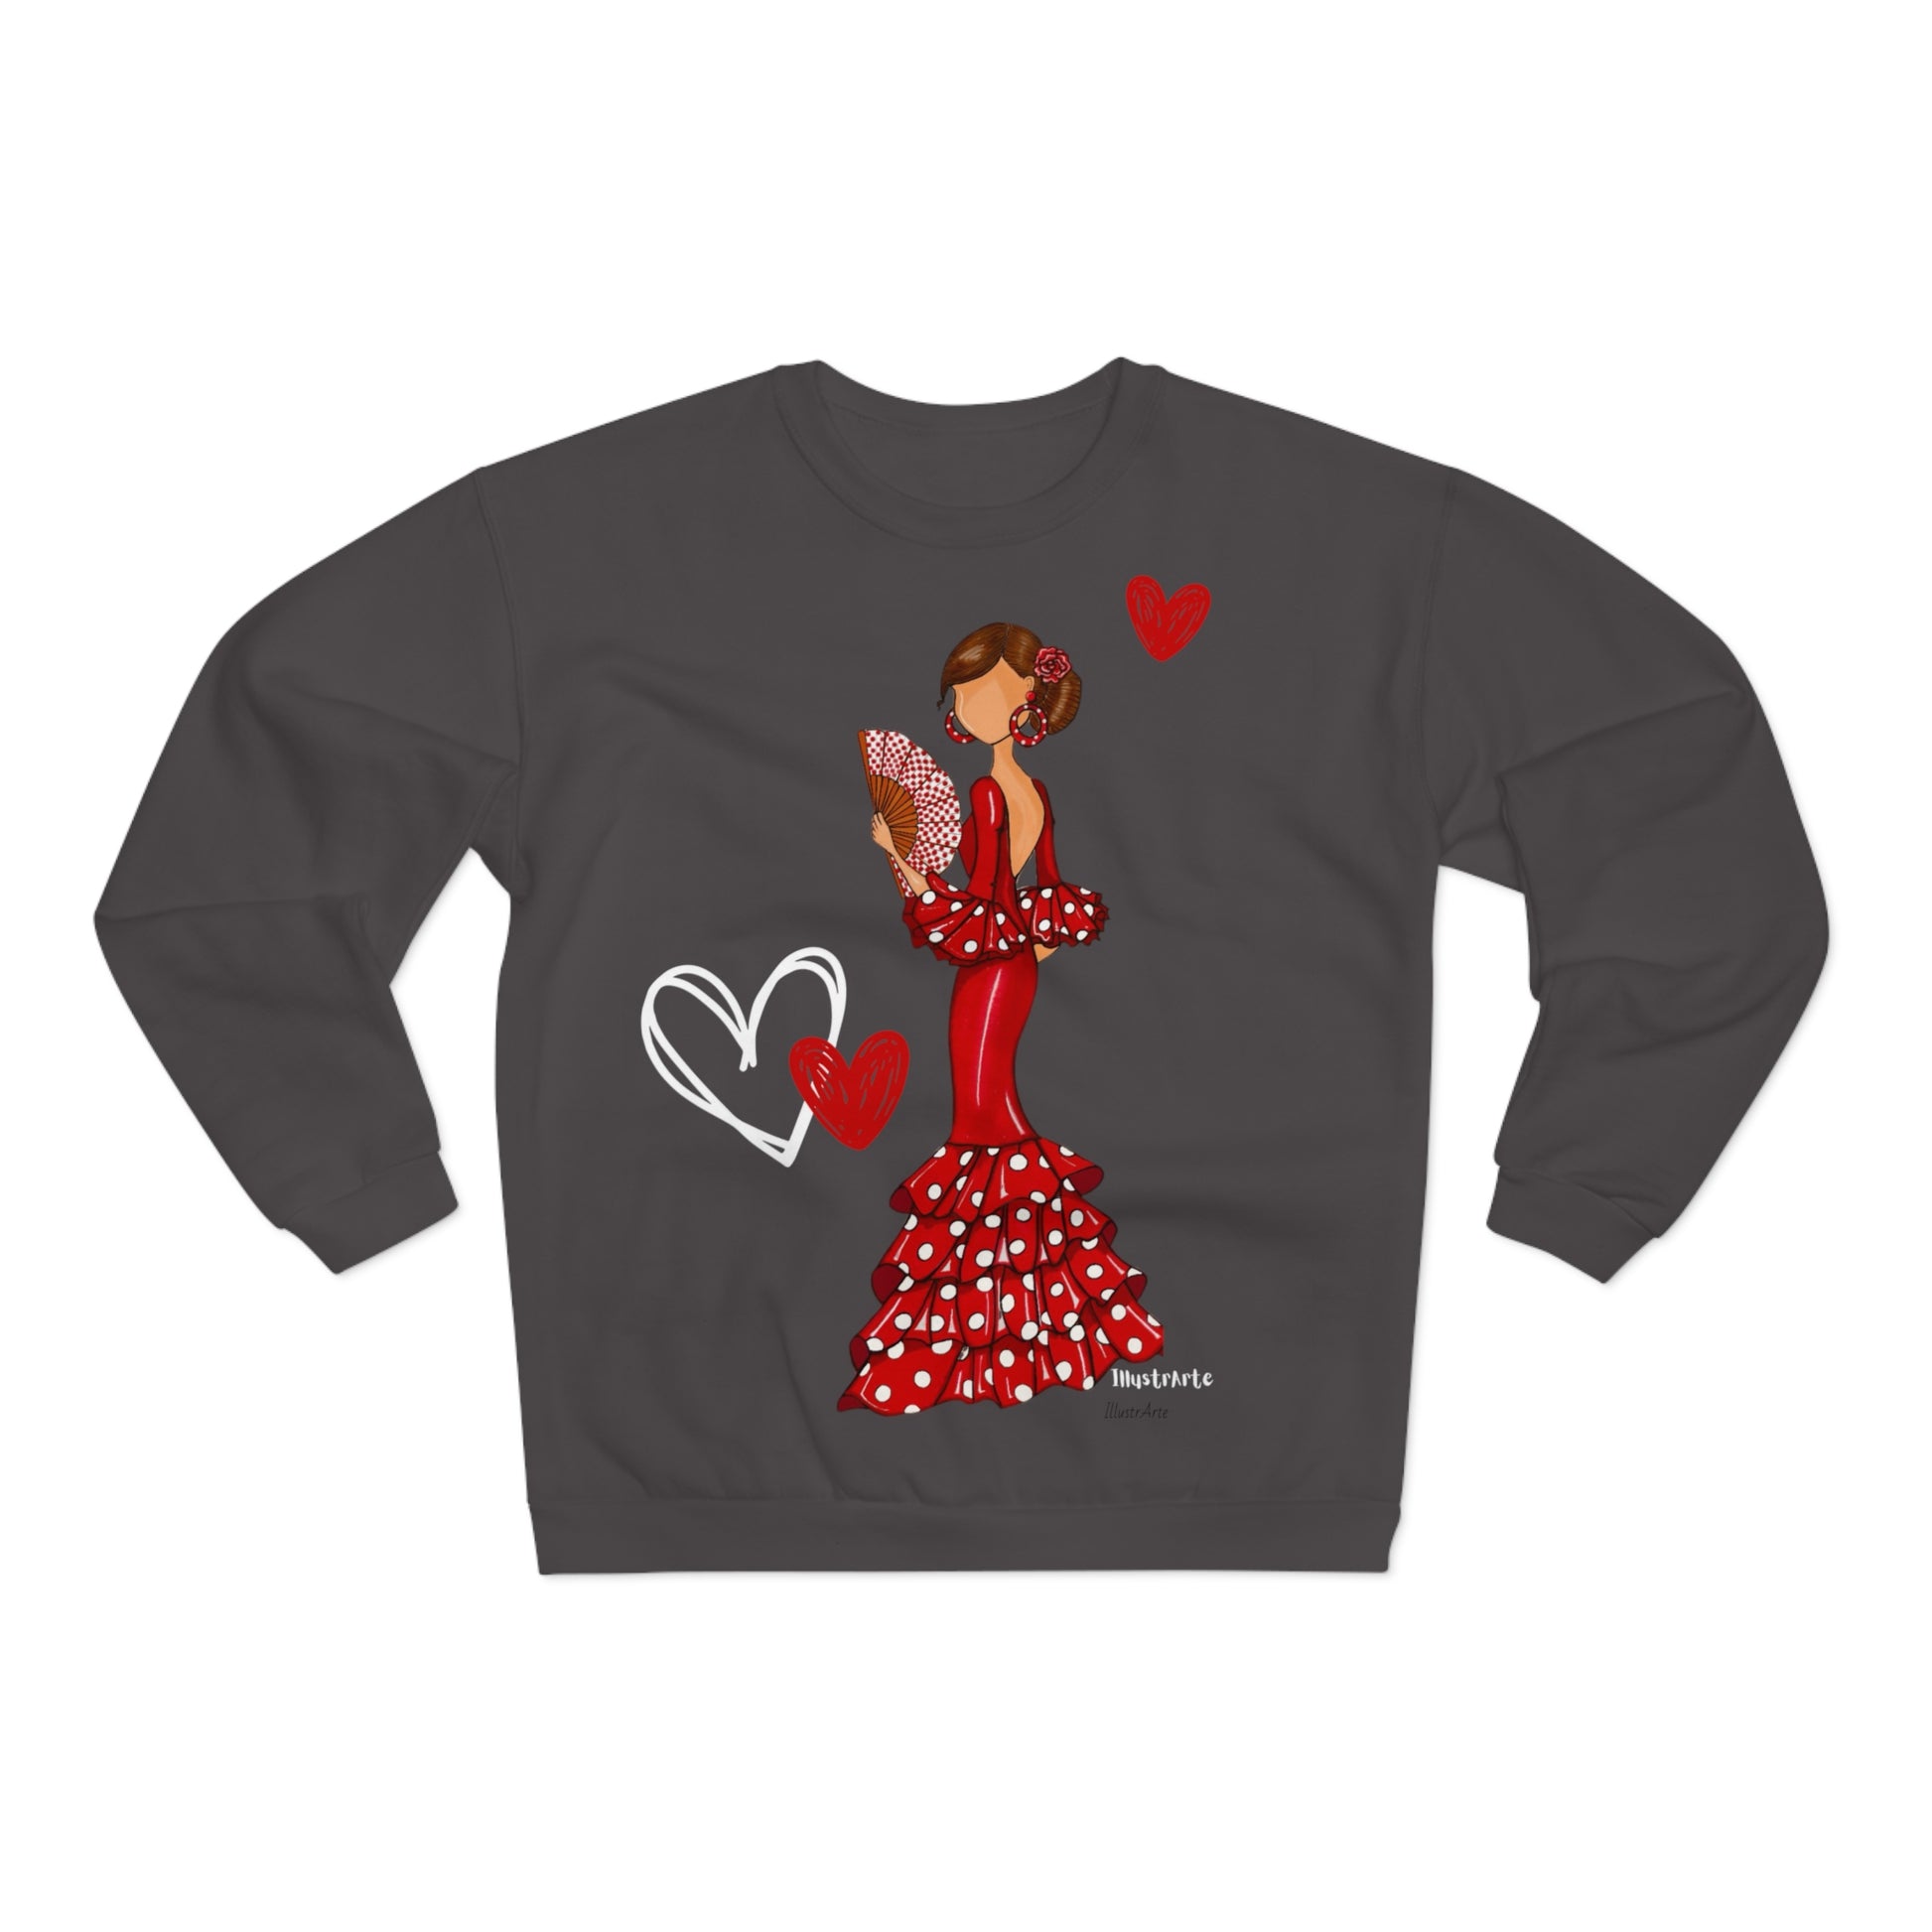 a sweatshirt with a woman in a red dress holding a fan